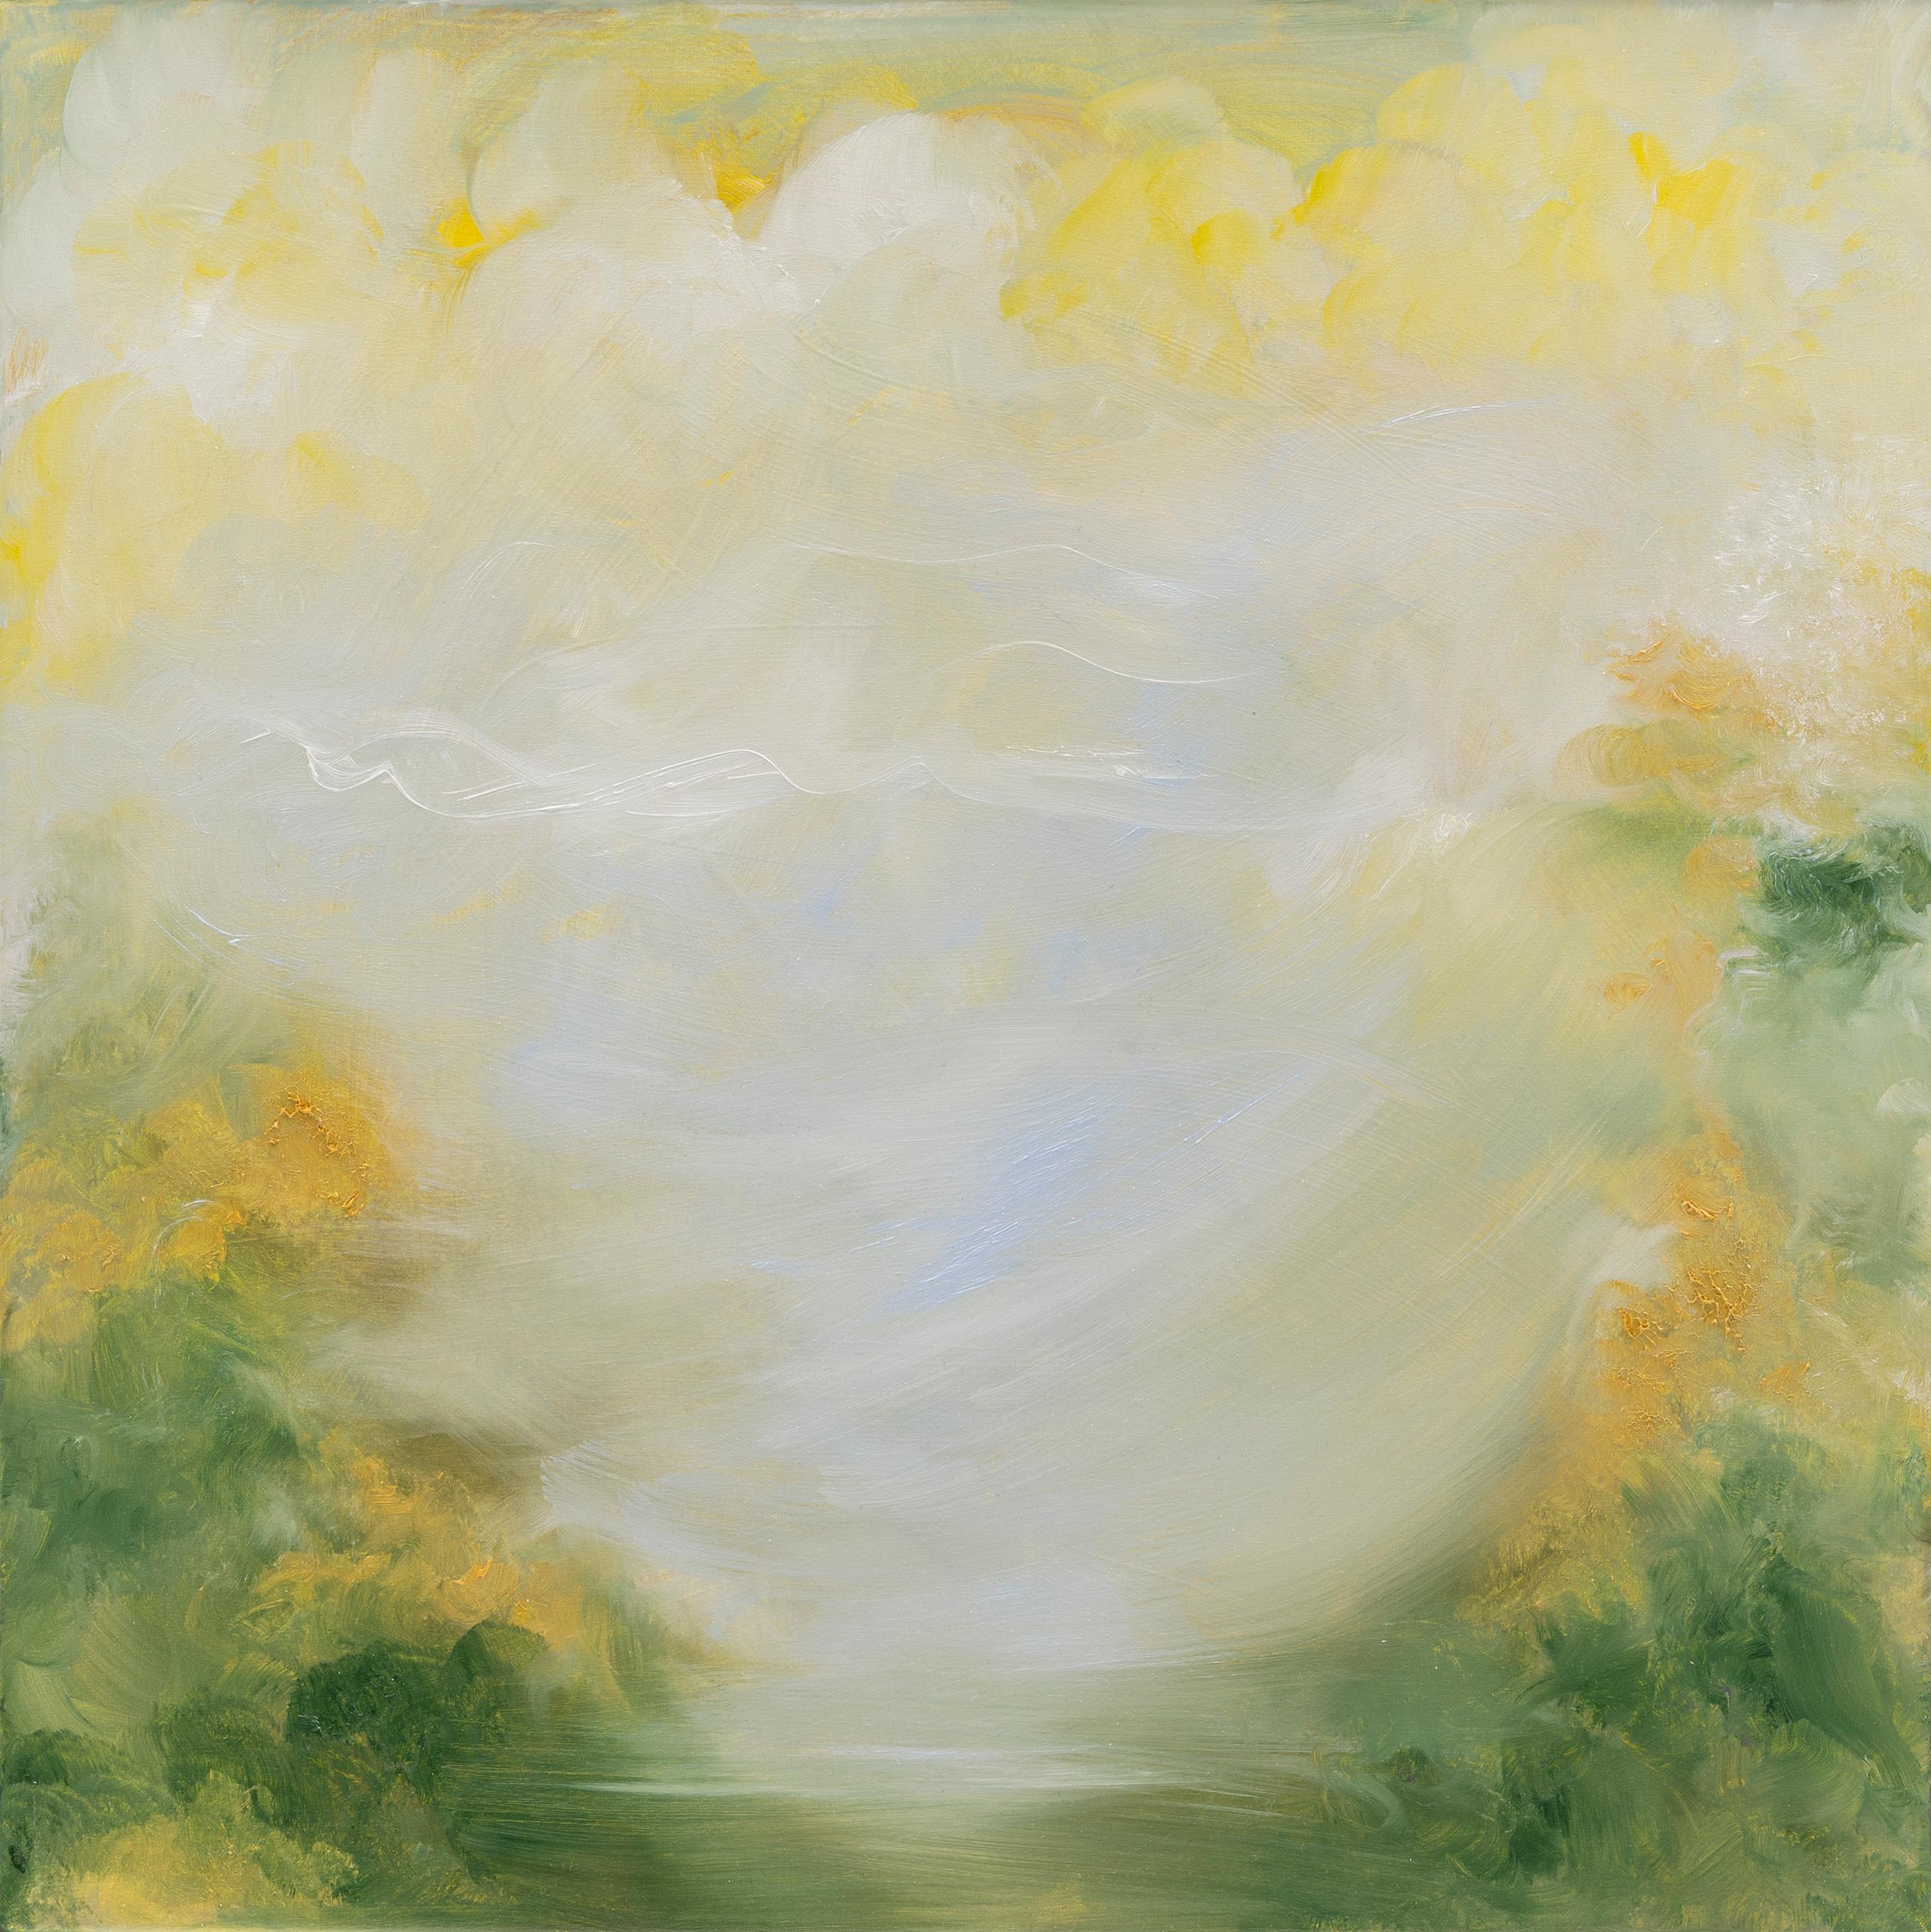 Jennifer L. Baker Landscape Painting - Born in spring - Soft green and gold abstract landscape painting